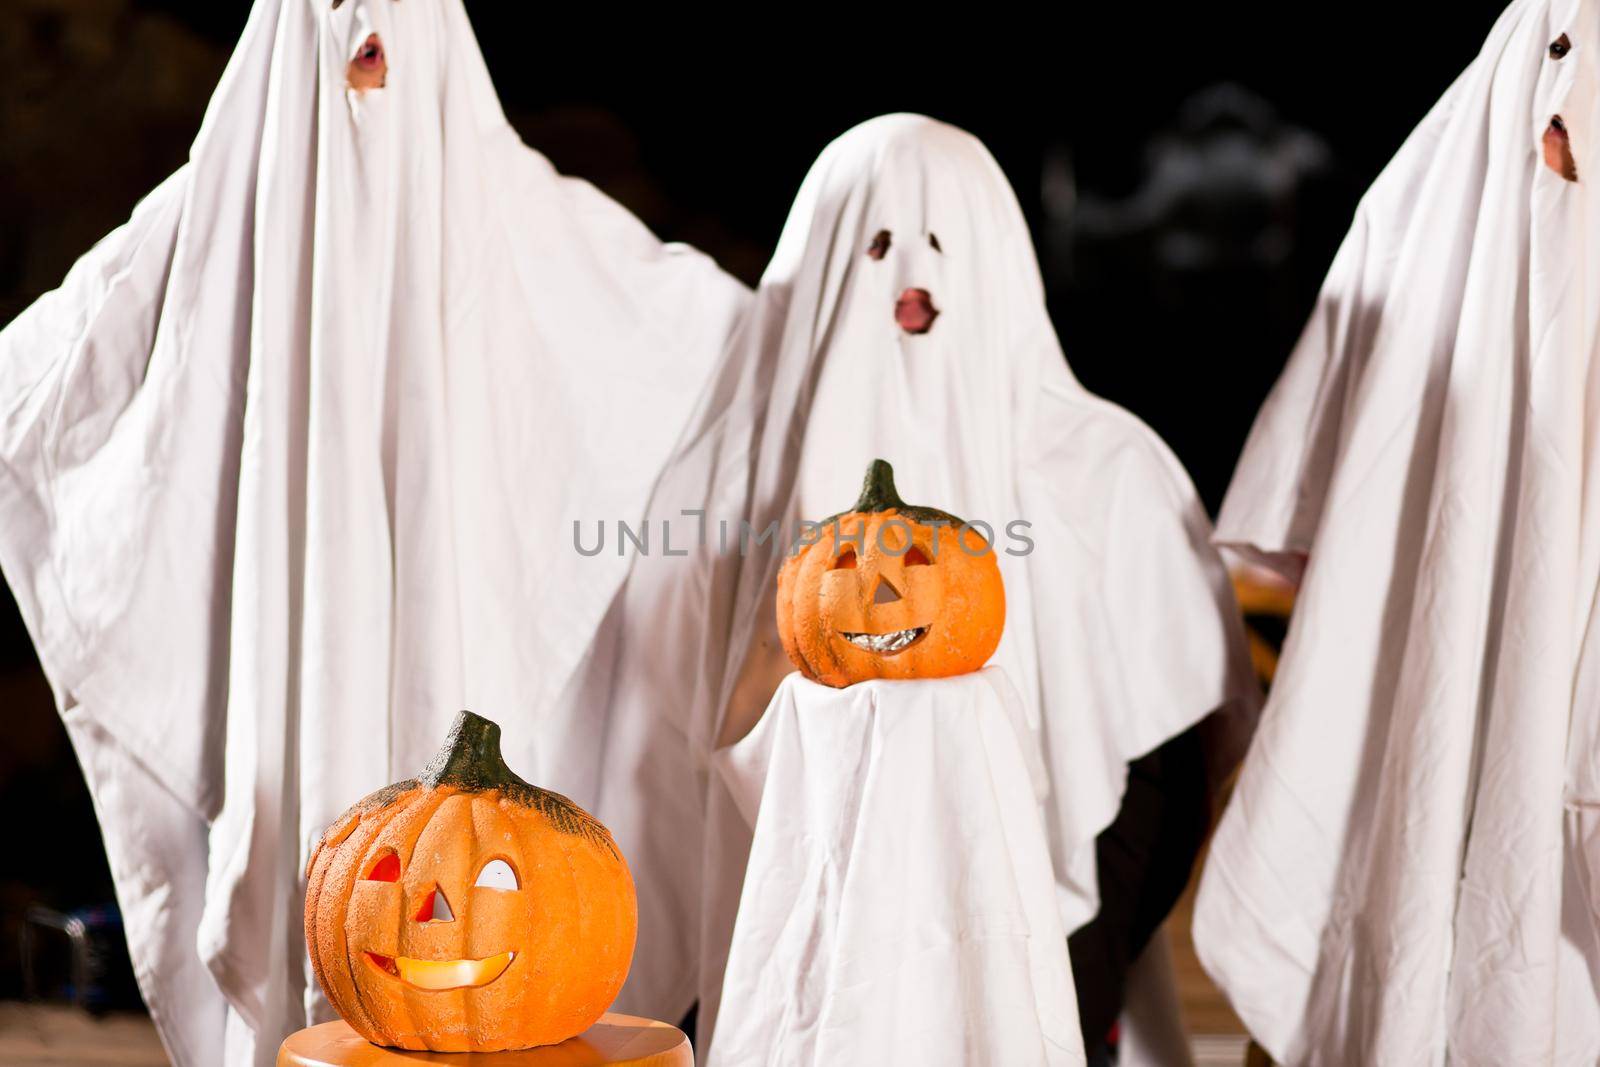 Three very, very scary spooks - kids dressed as ghosts - on Halloween or for carnival or a costume party, FOCUS IS ON PUMPKIN